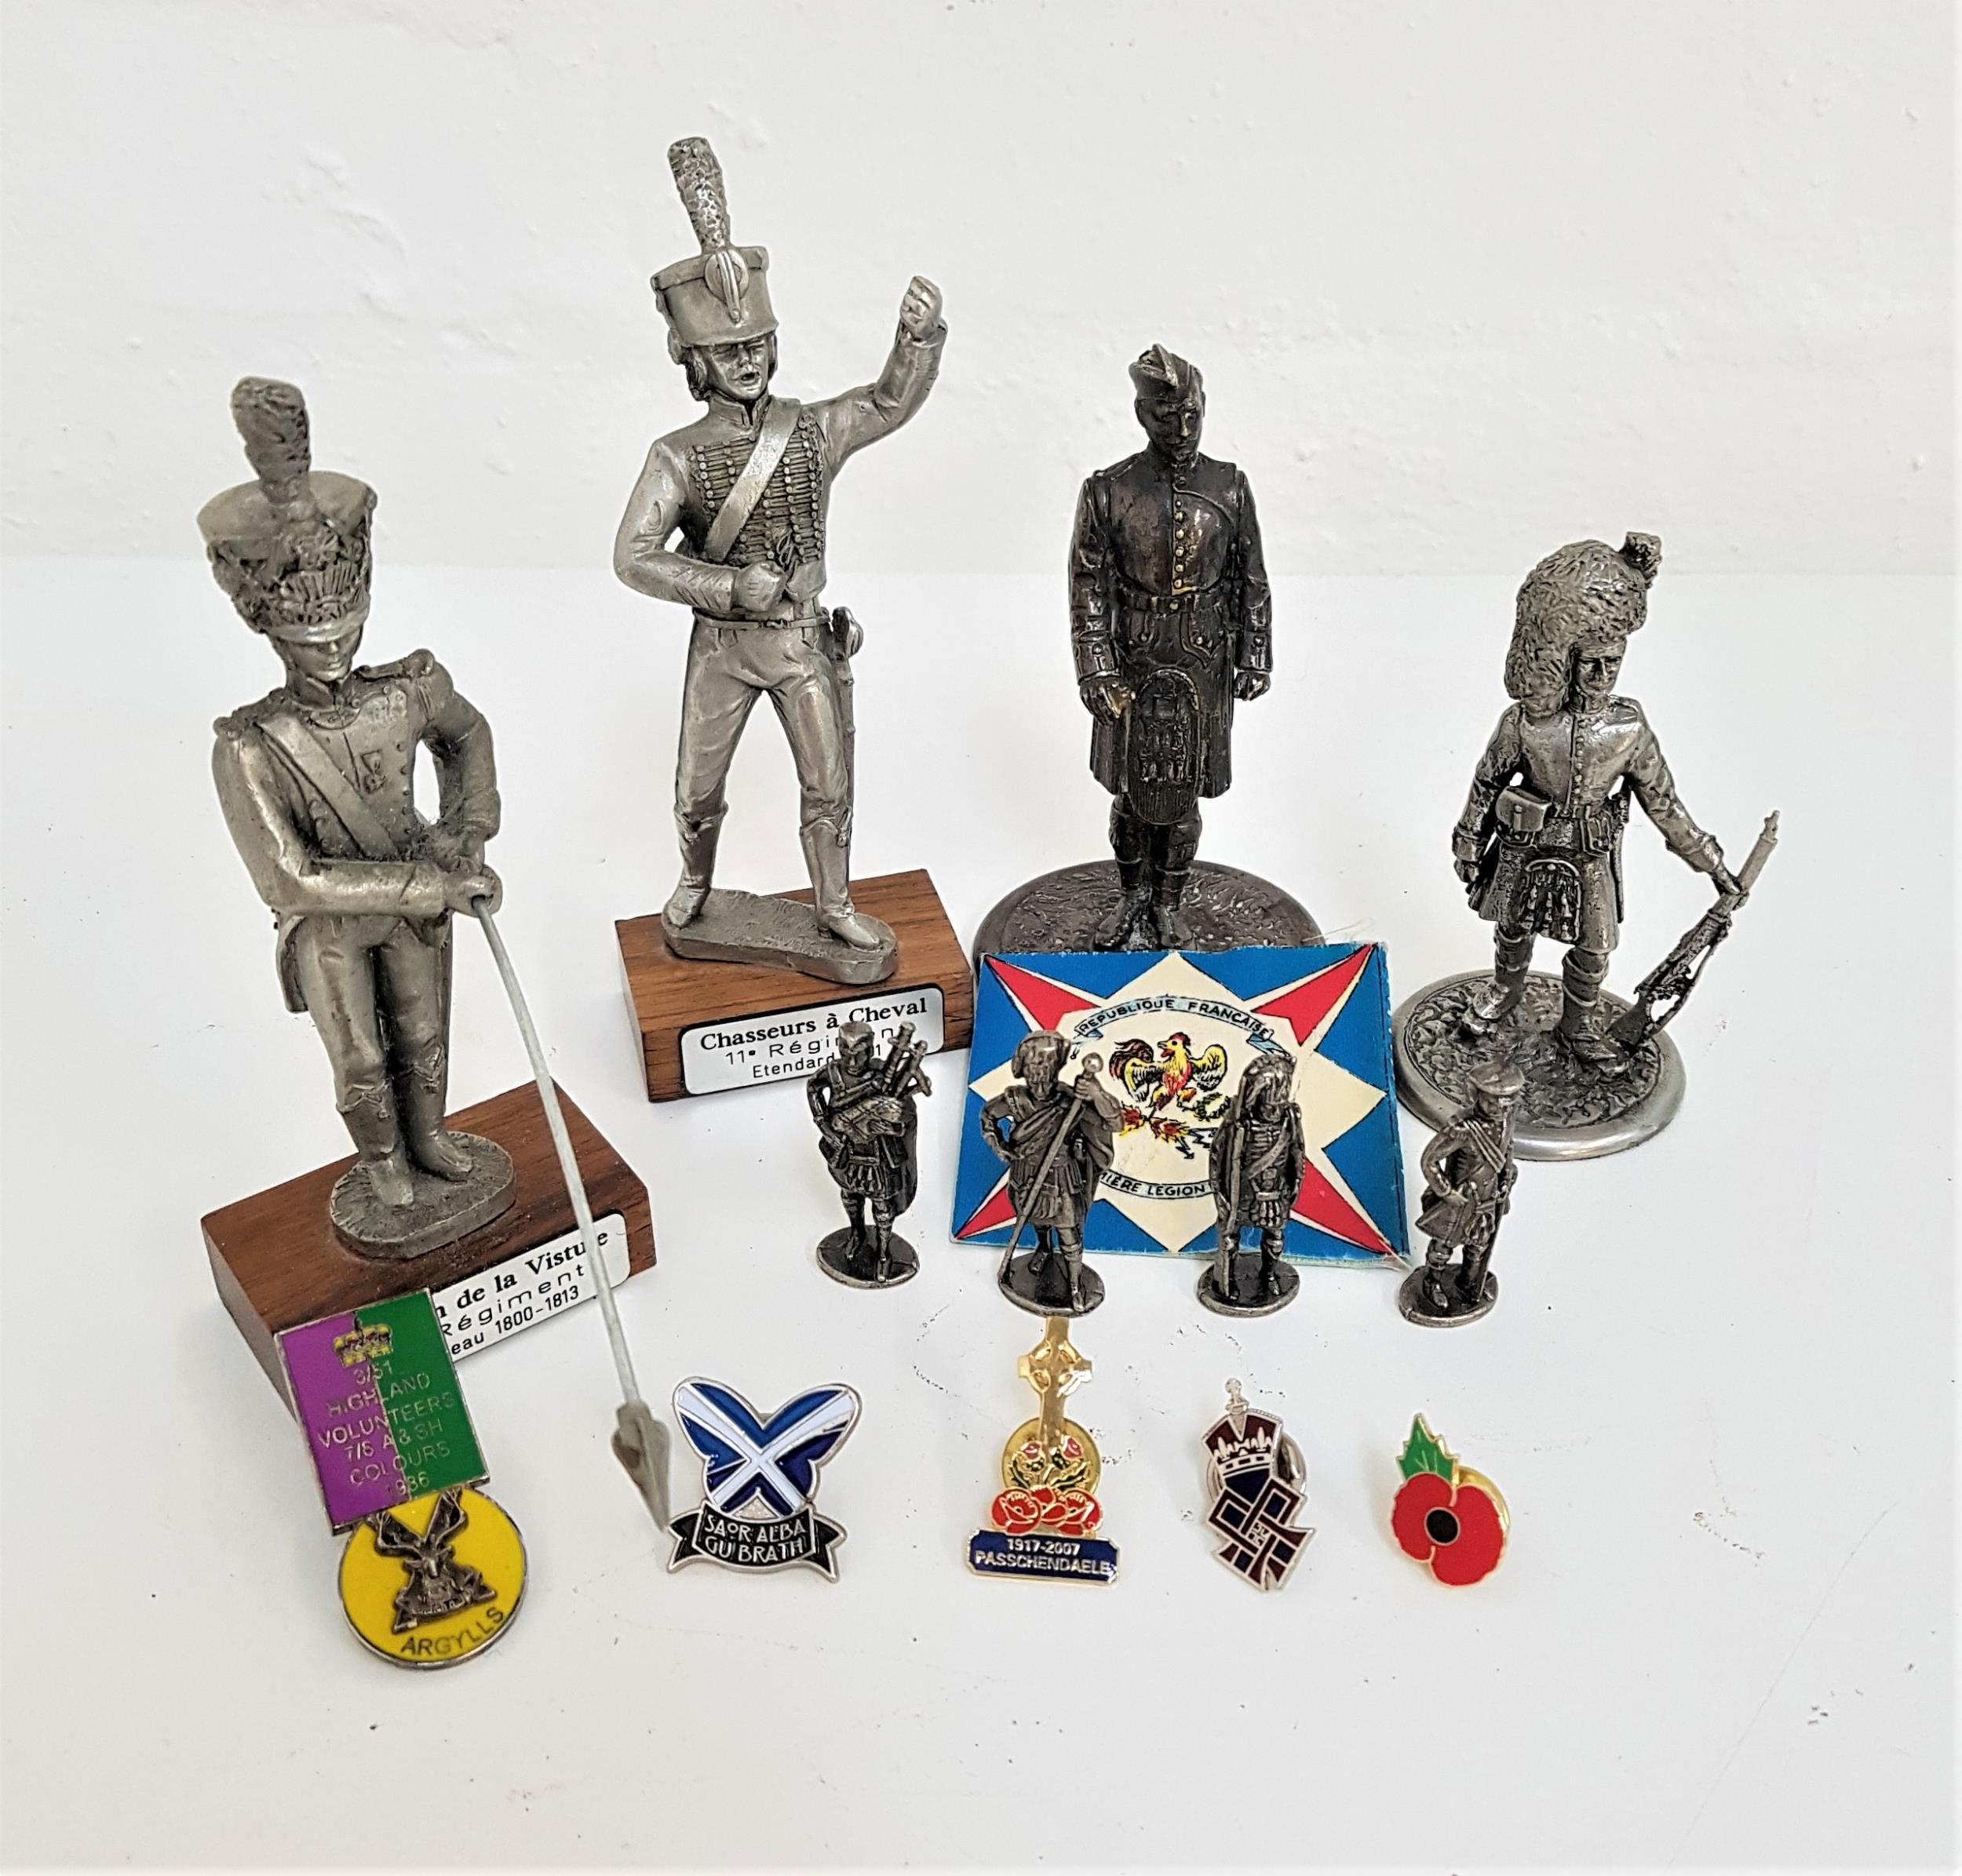 SIX PEWTER SCOTTISH SOLDIERS all in Highland uniform, ranging in height from 4cm to 9.5cm; and two